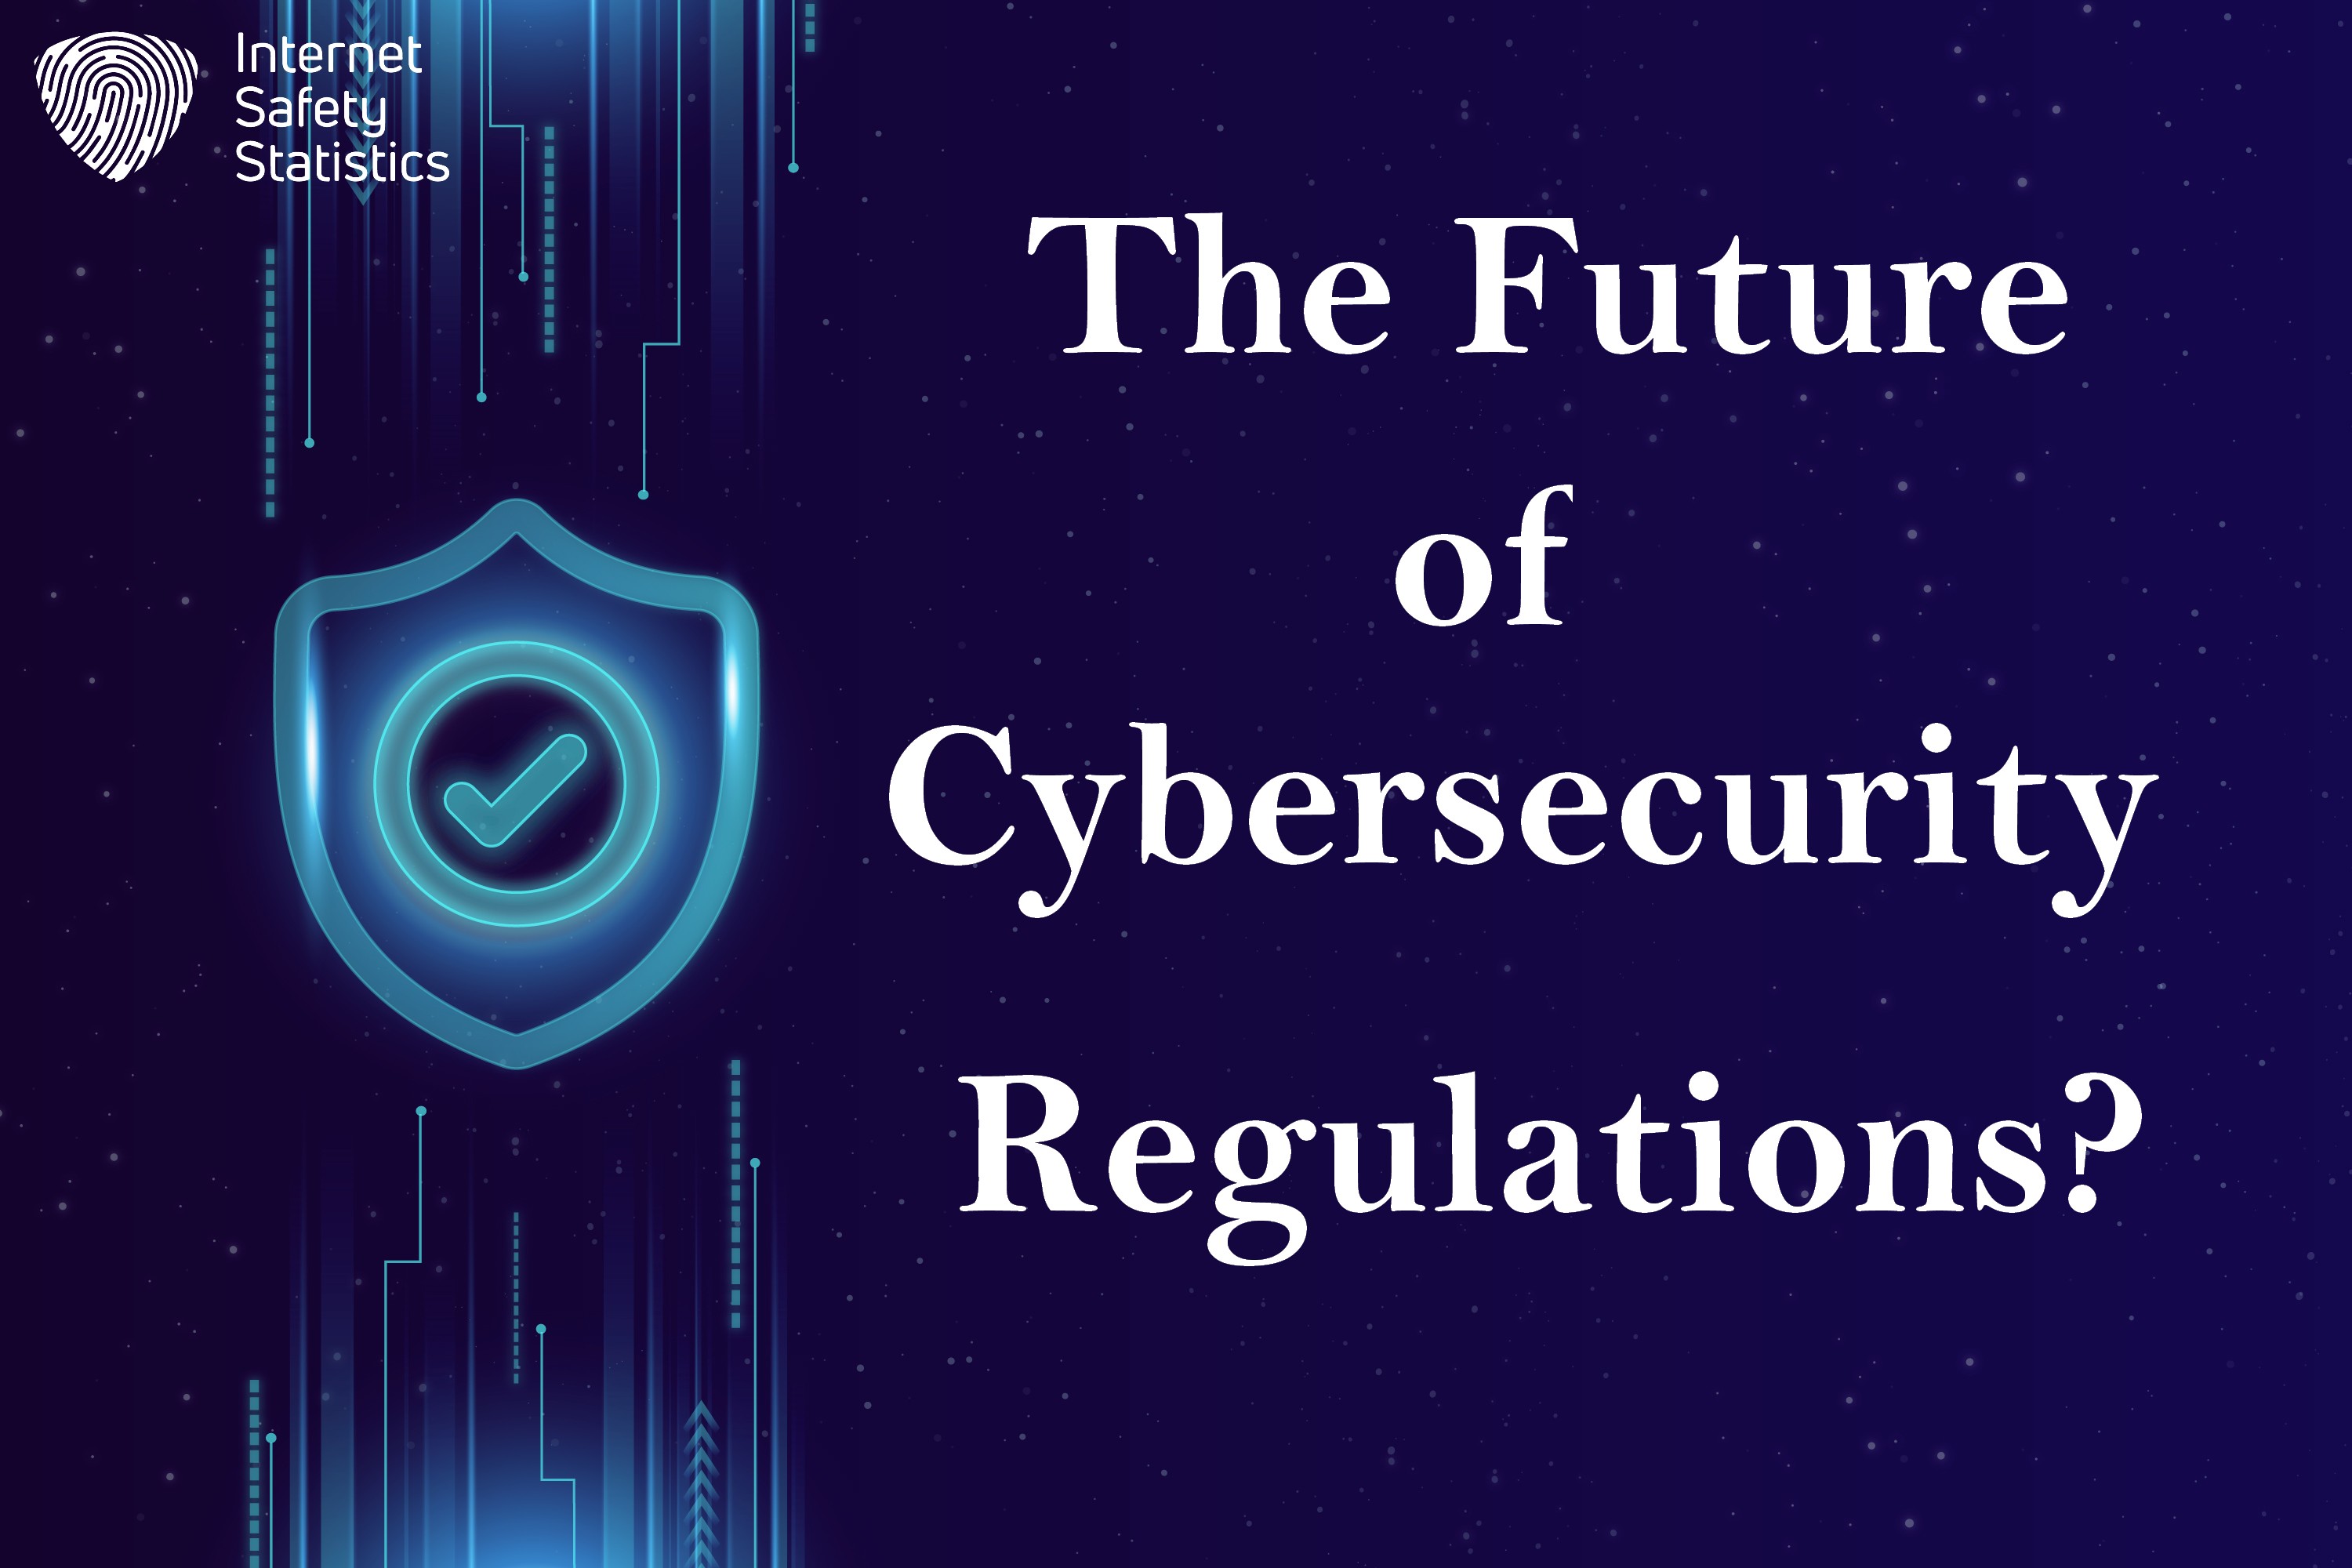 The Future of Cybersecurity Regulations